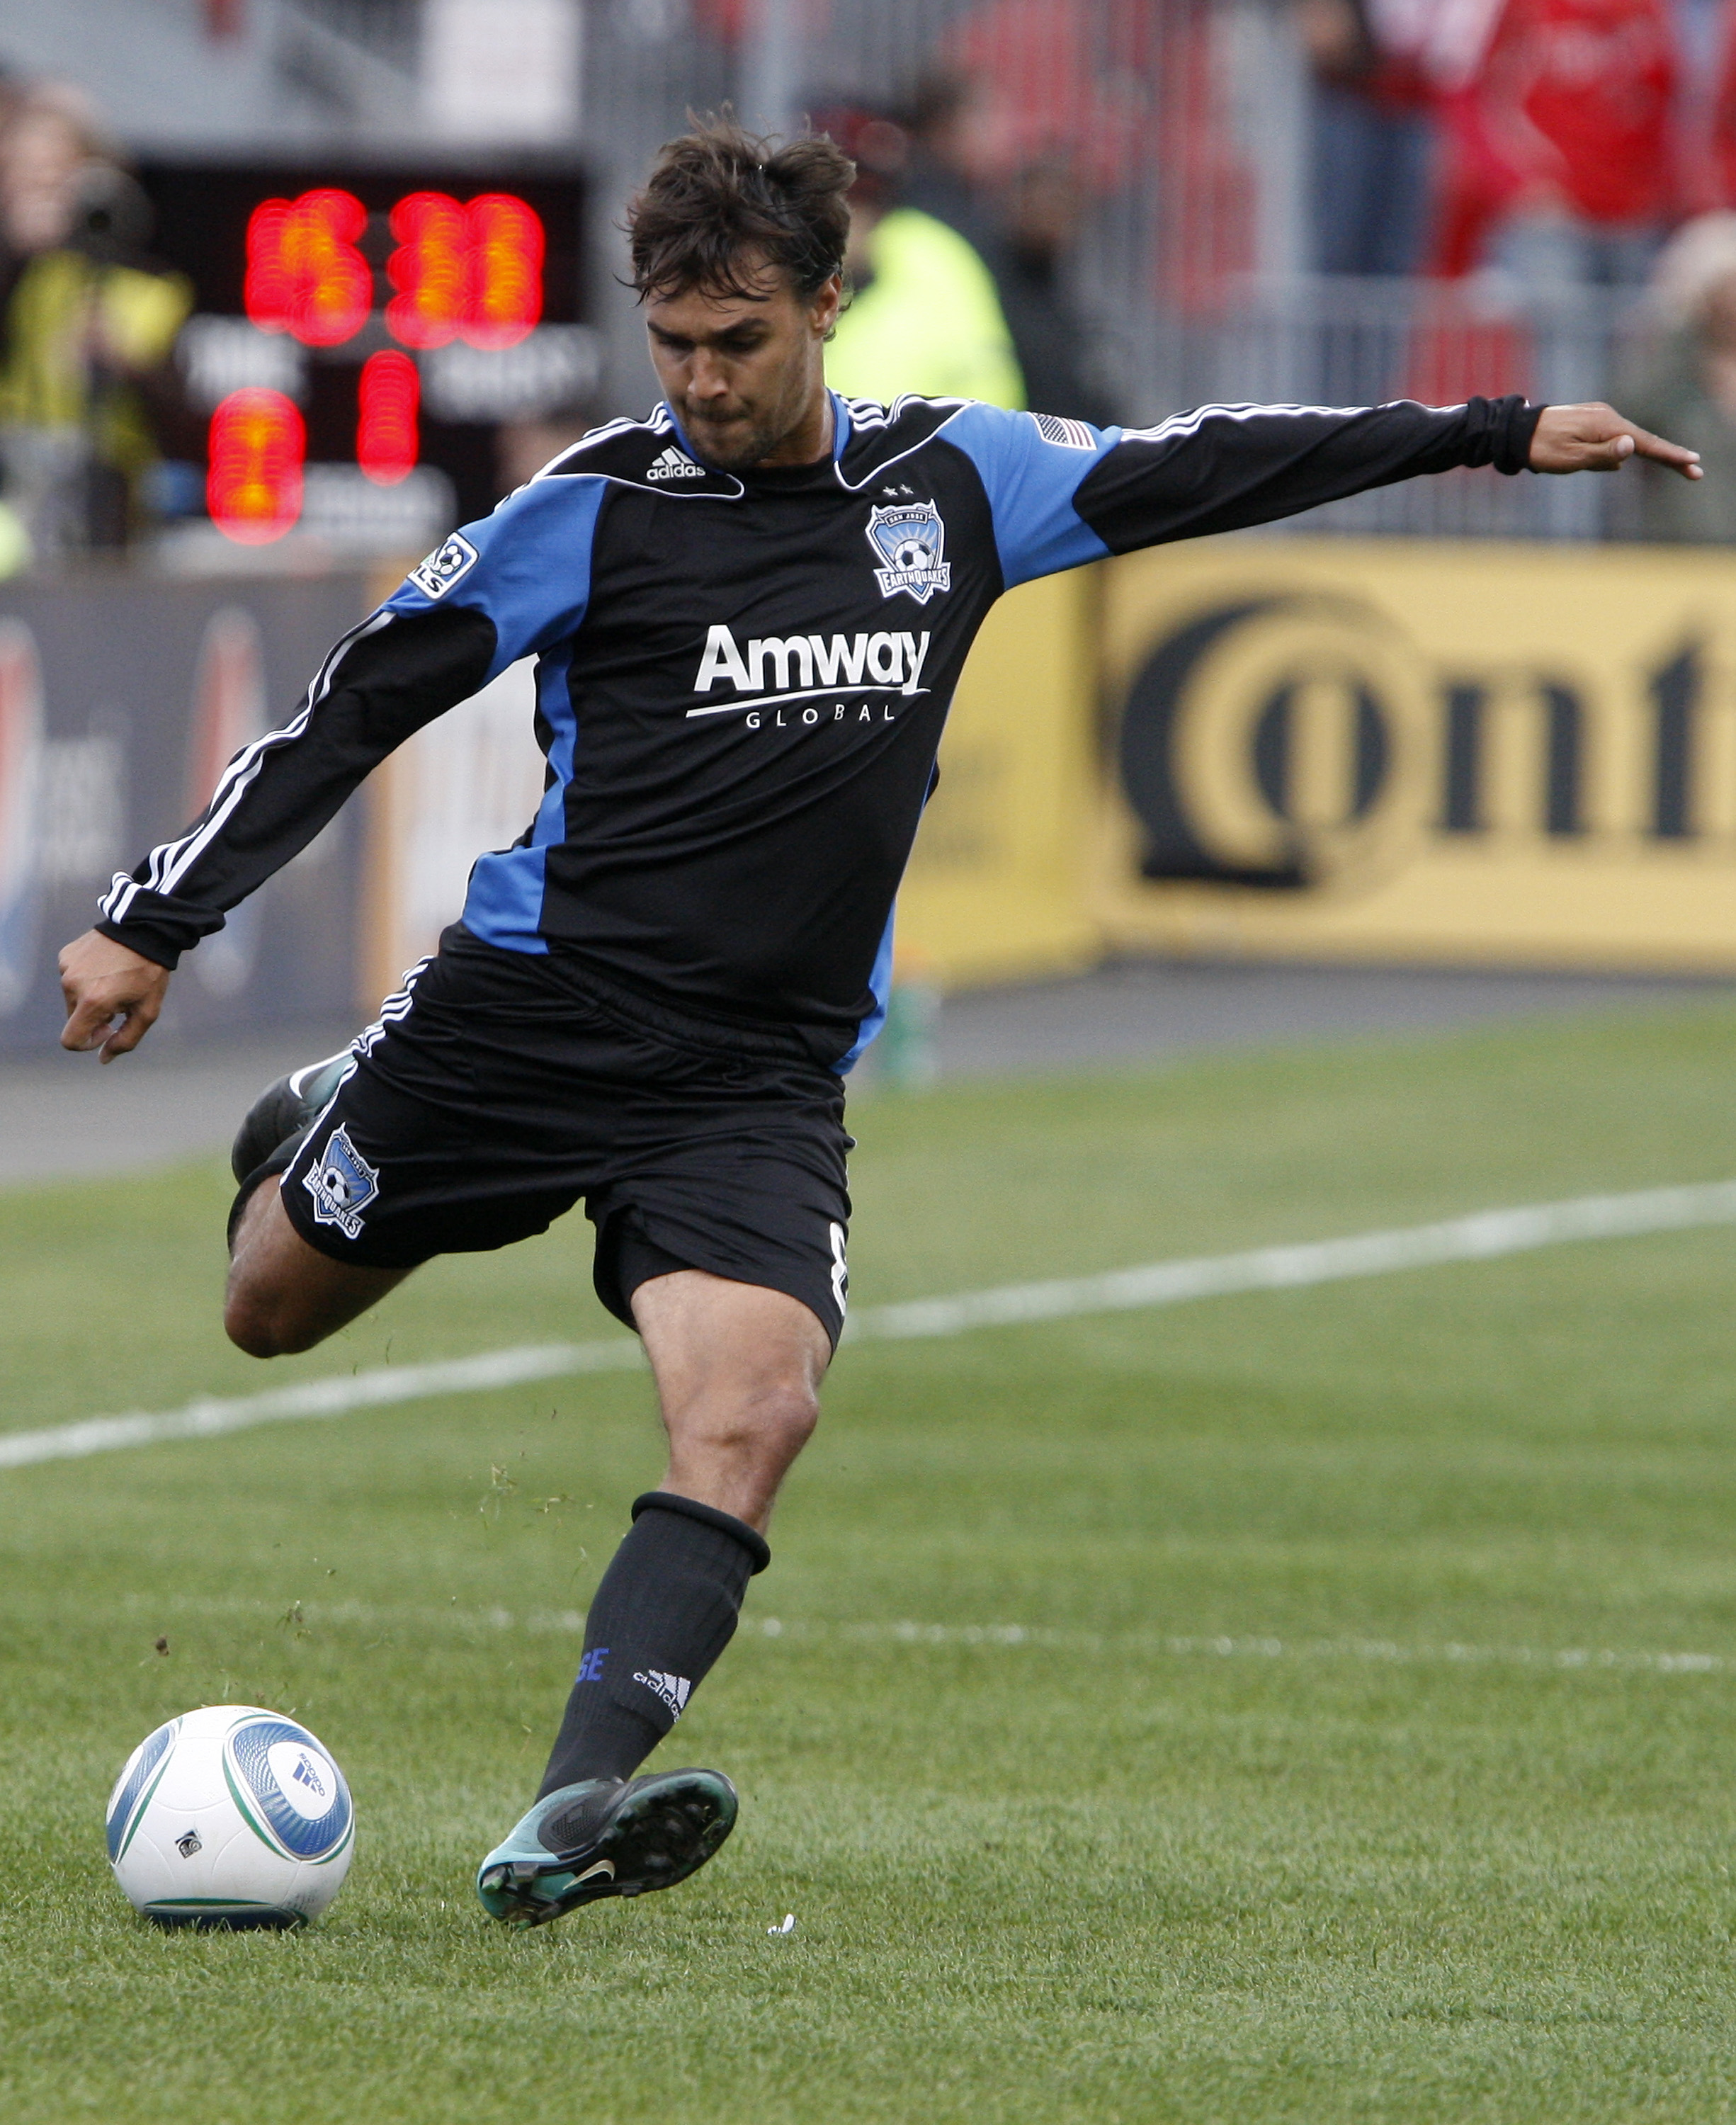 TORONTO - SEPTEMBER 25: Chris Wondolowski #8 of San Jose Earthquakes moves the ball during a MLS game against Toronto FC at BMO Field September 25, 2010 in Toronto, Ontario, Canada. (Photo by Abelimages/Getty Images)